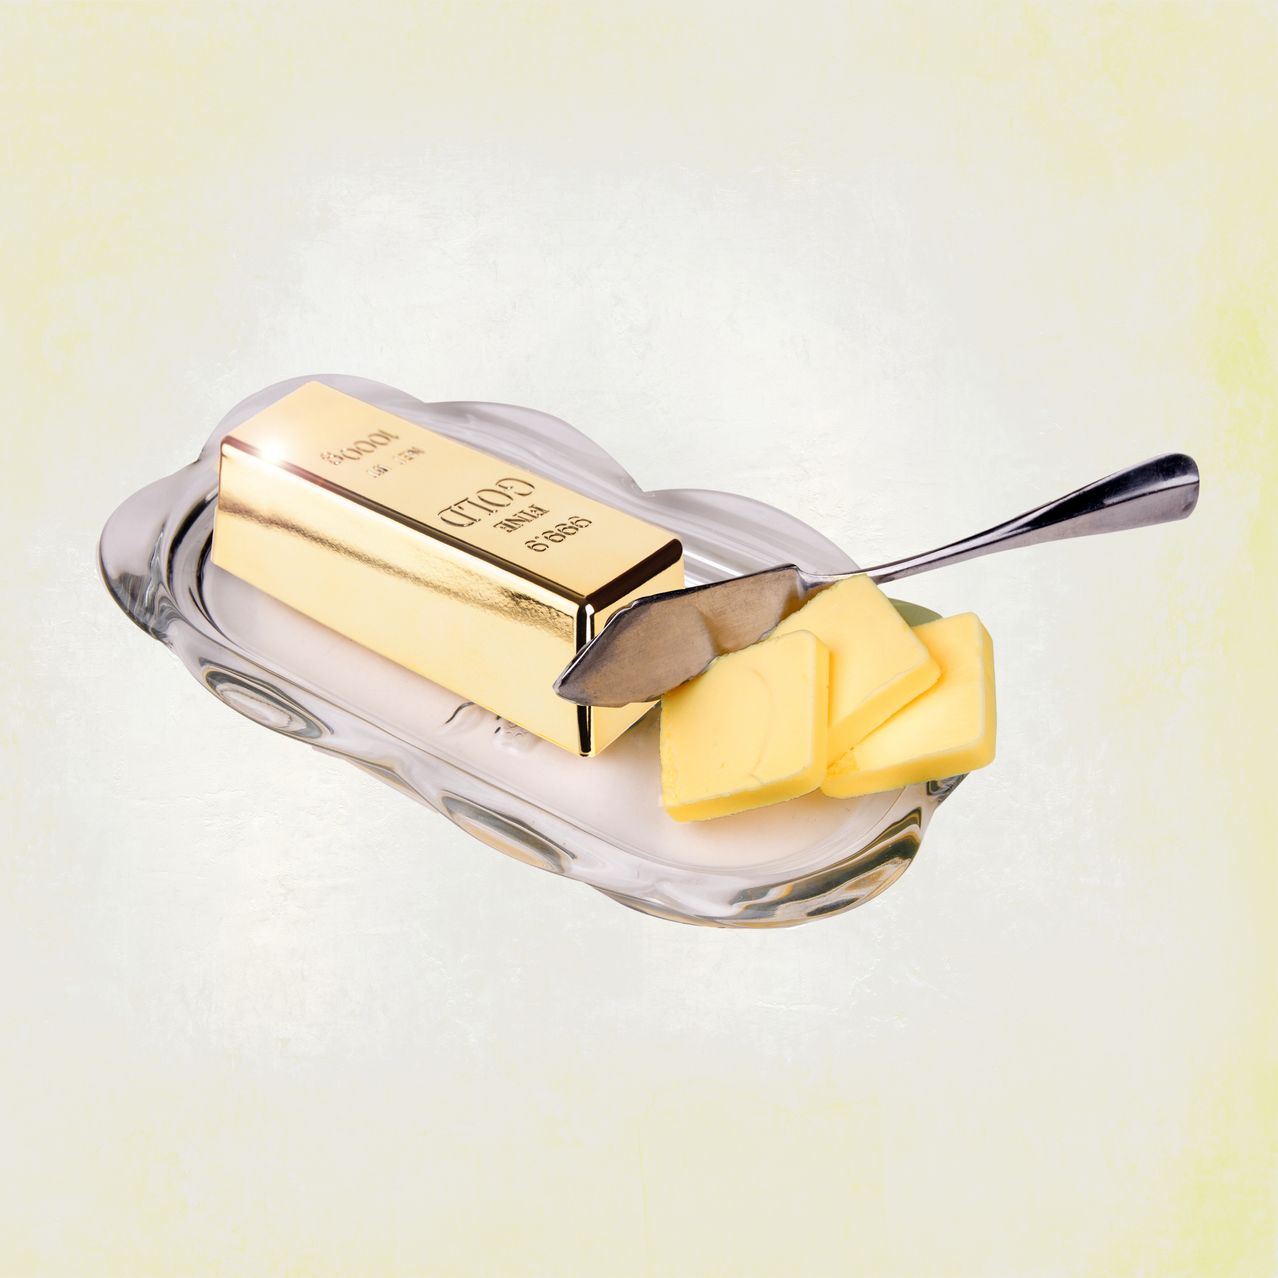 The Trouble With Butter: Tight Dairy Supplies Send Prices Surging Ahead of Baking Season